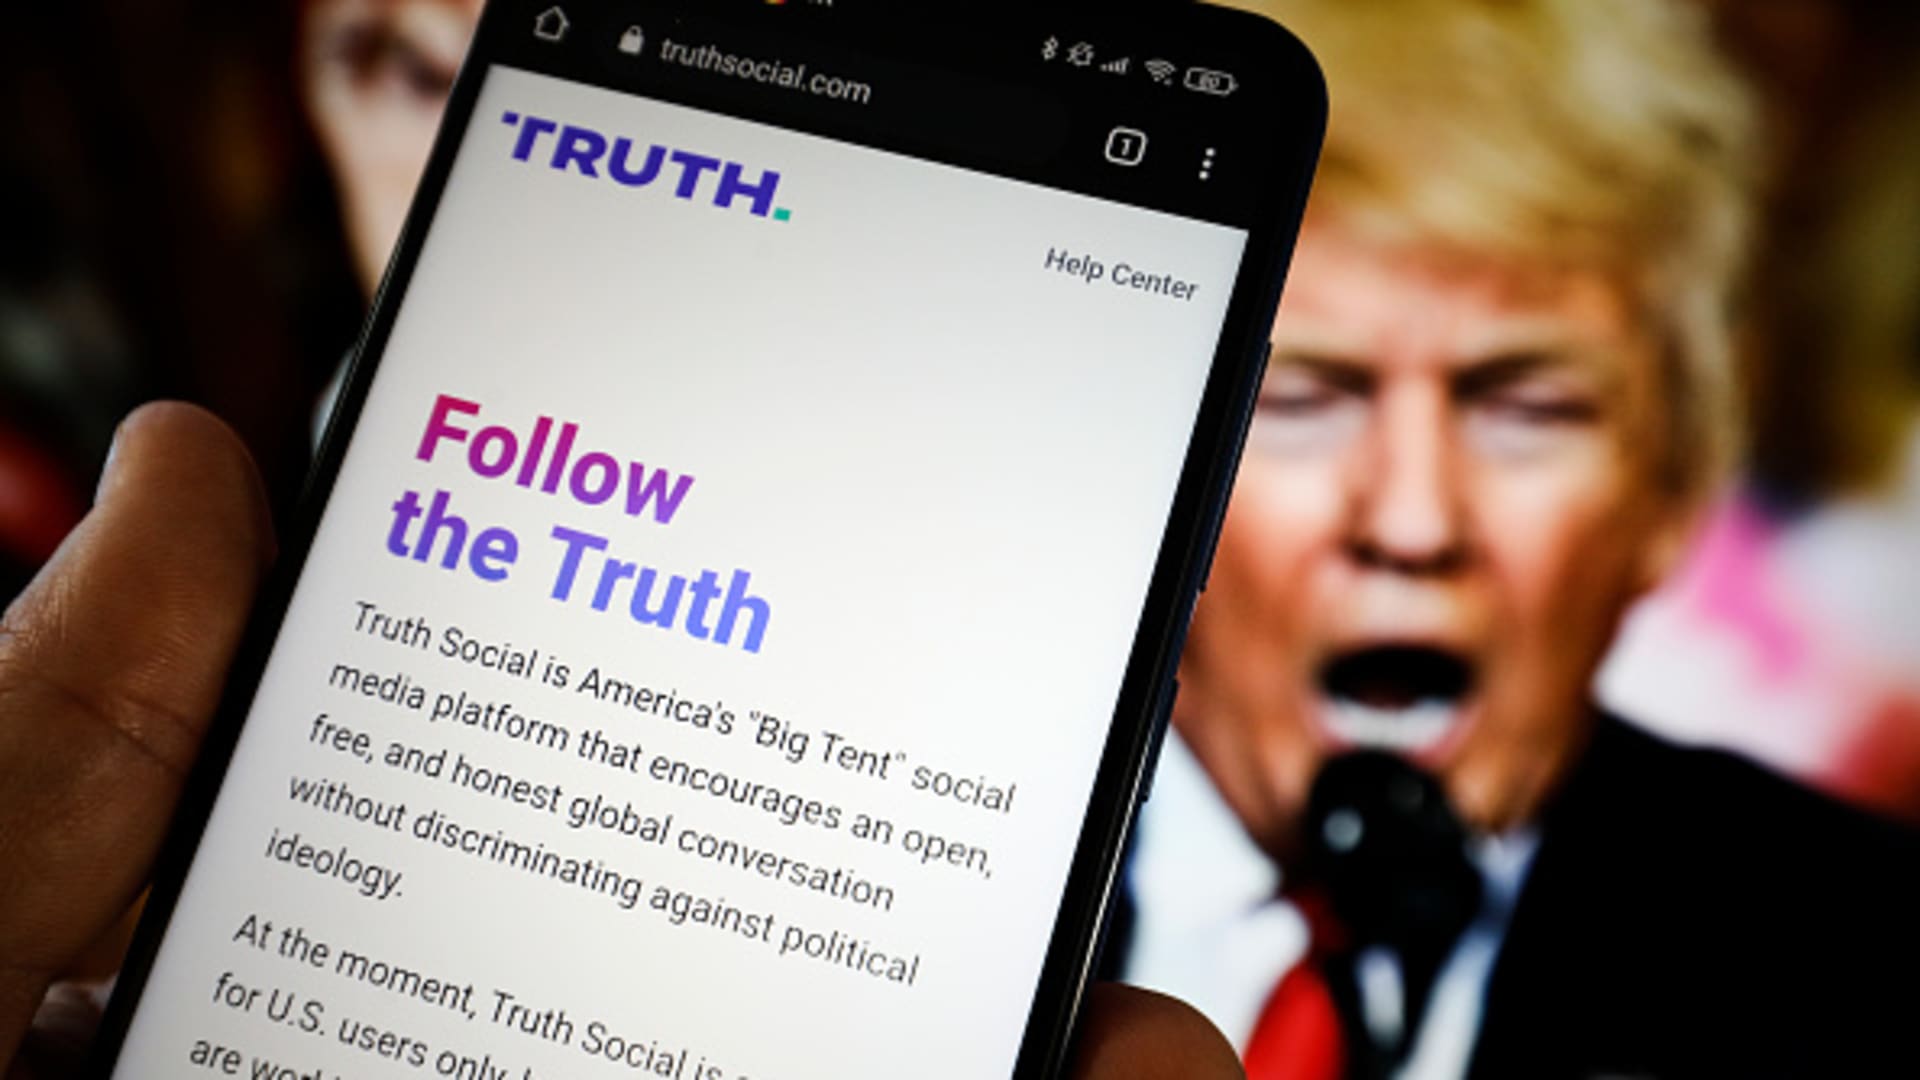 Trump tries to boost support for Truth Social as DJT stock tanks [Video]